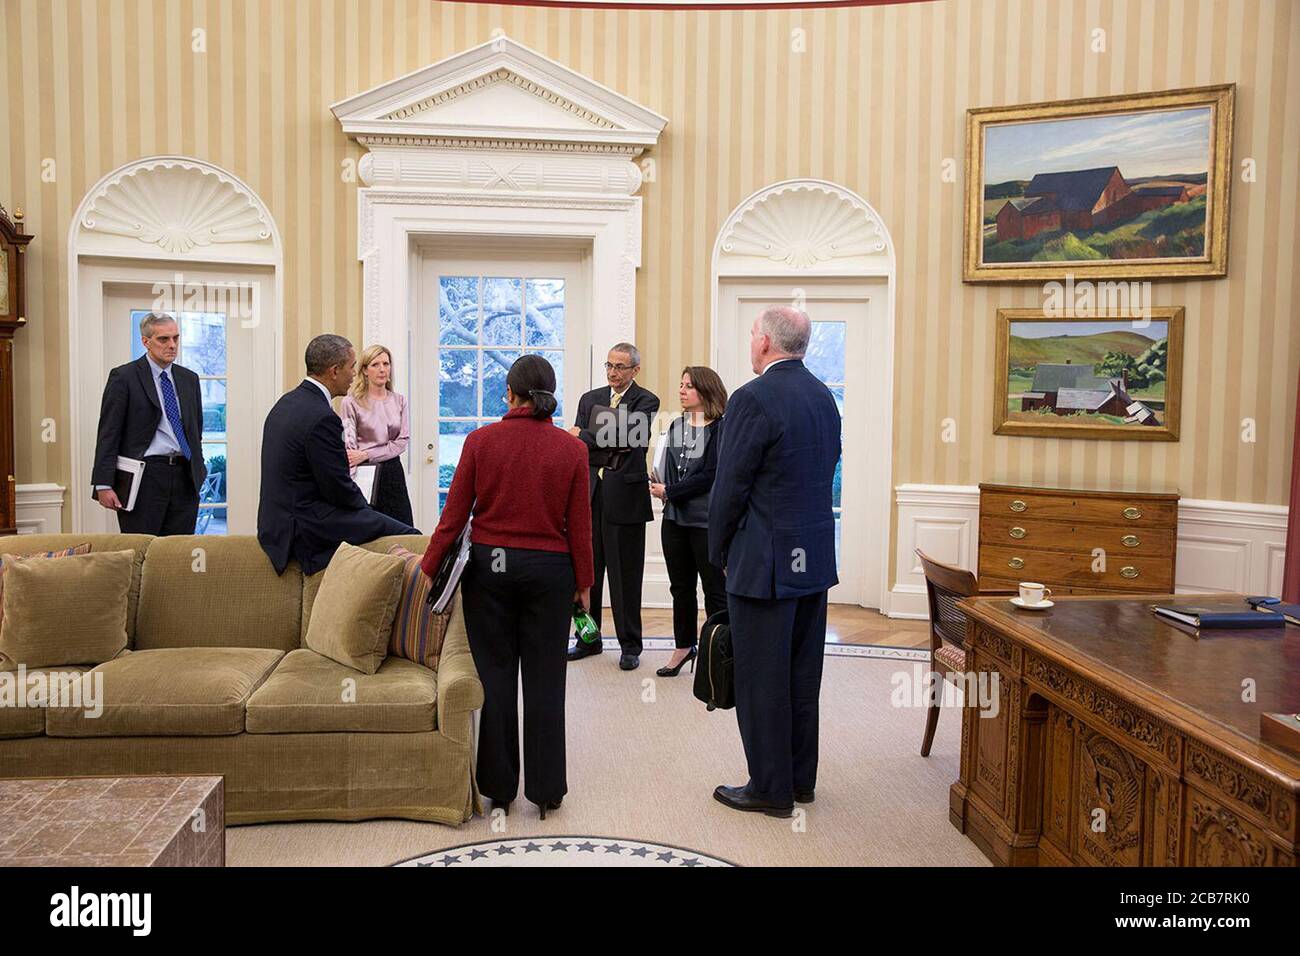 President Barack Obama talks with from left: Chief of Staff Denis McDonough; Kathryn Ruemmler Counsel to the President; National Security Advisor Susan E. Rice; John Podesta Counselor to the President; Lisa Monaco Assistant to the President for Homeland Security and Counterterrorism; and CIA Director John Brennan in the Oval Office March 19 2014. (Official White House Photo by Pete Souza) ca. 19 March 2014 Stock Photo